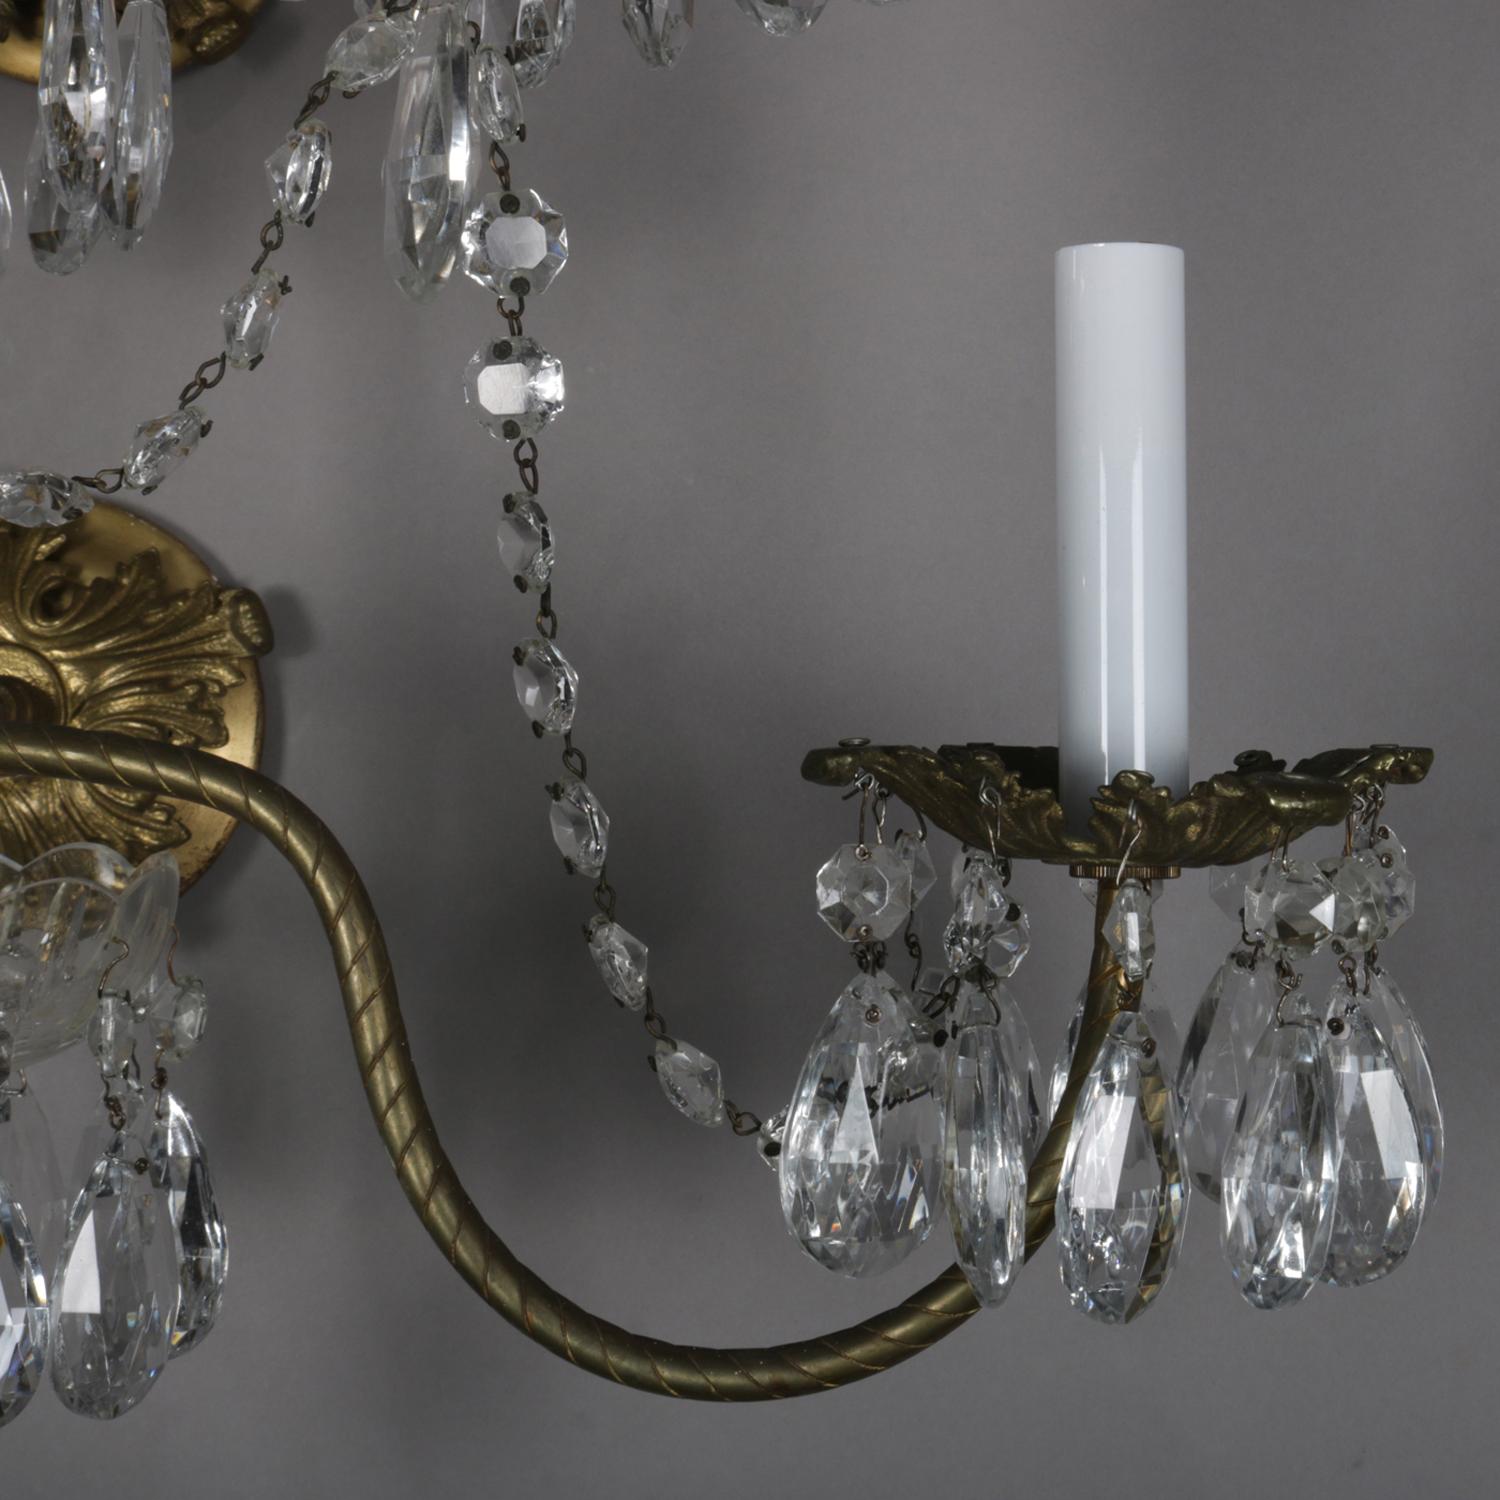 Pair of French Branch Chandelier Rock Crystal Electric Candle Light Wall Sconces (20. Jahrhundert)